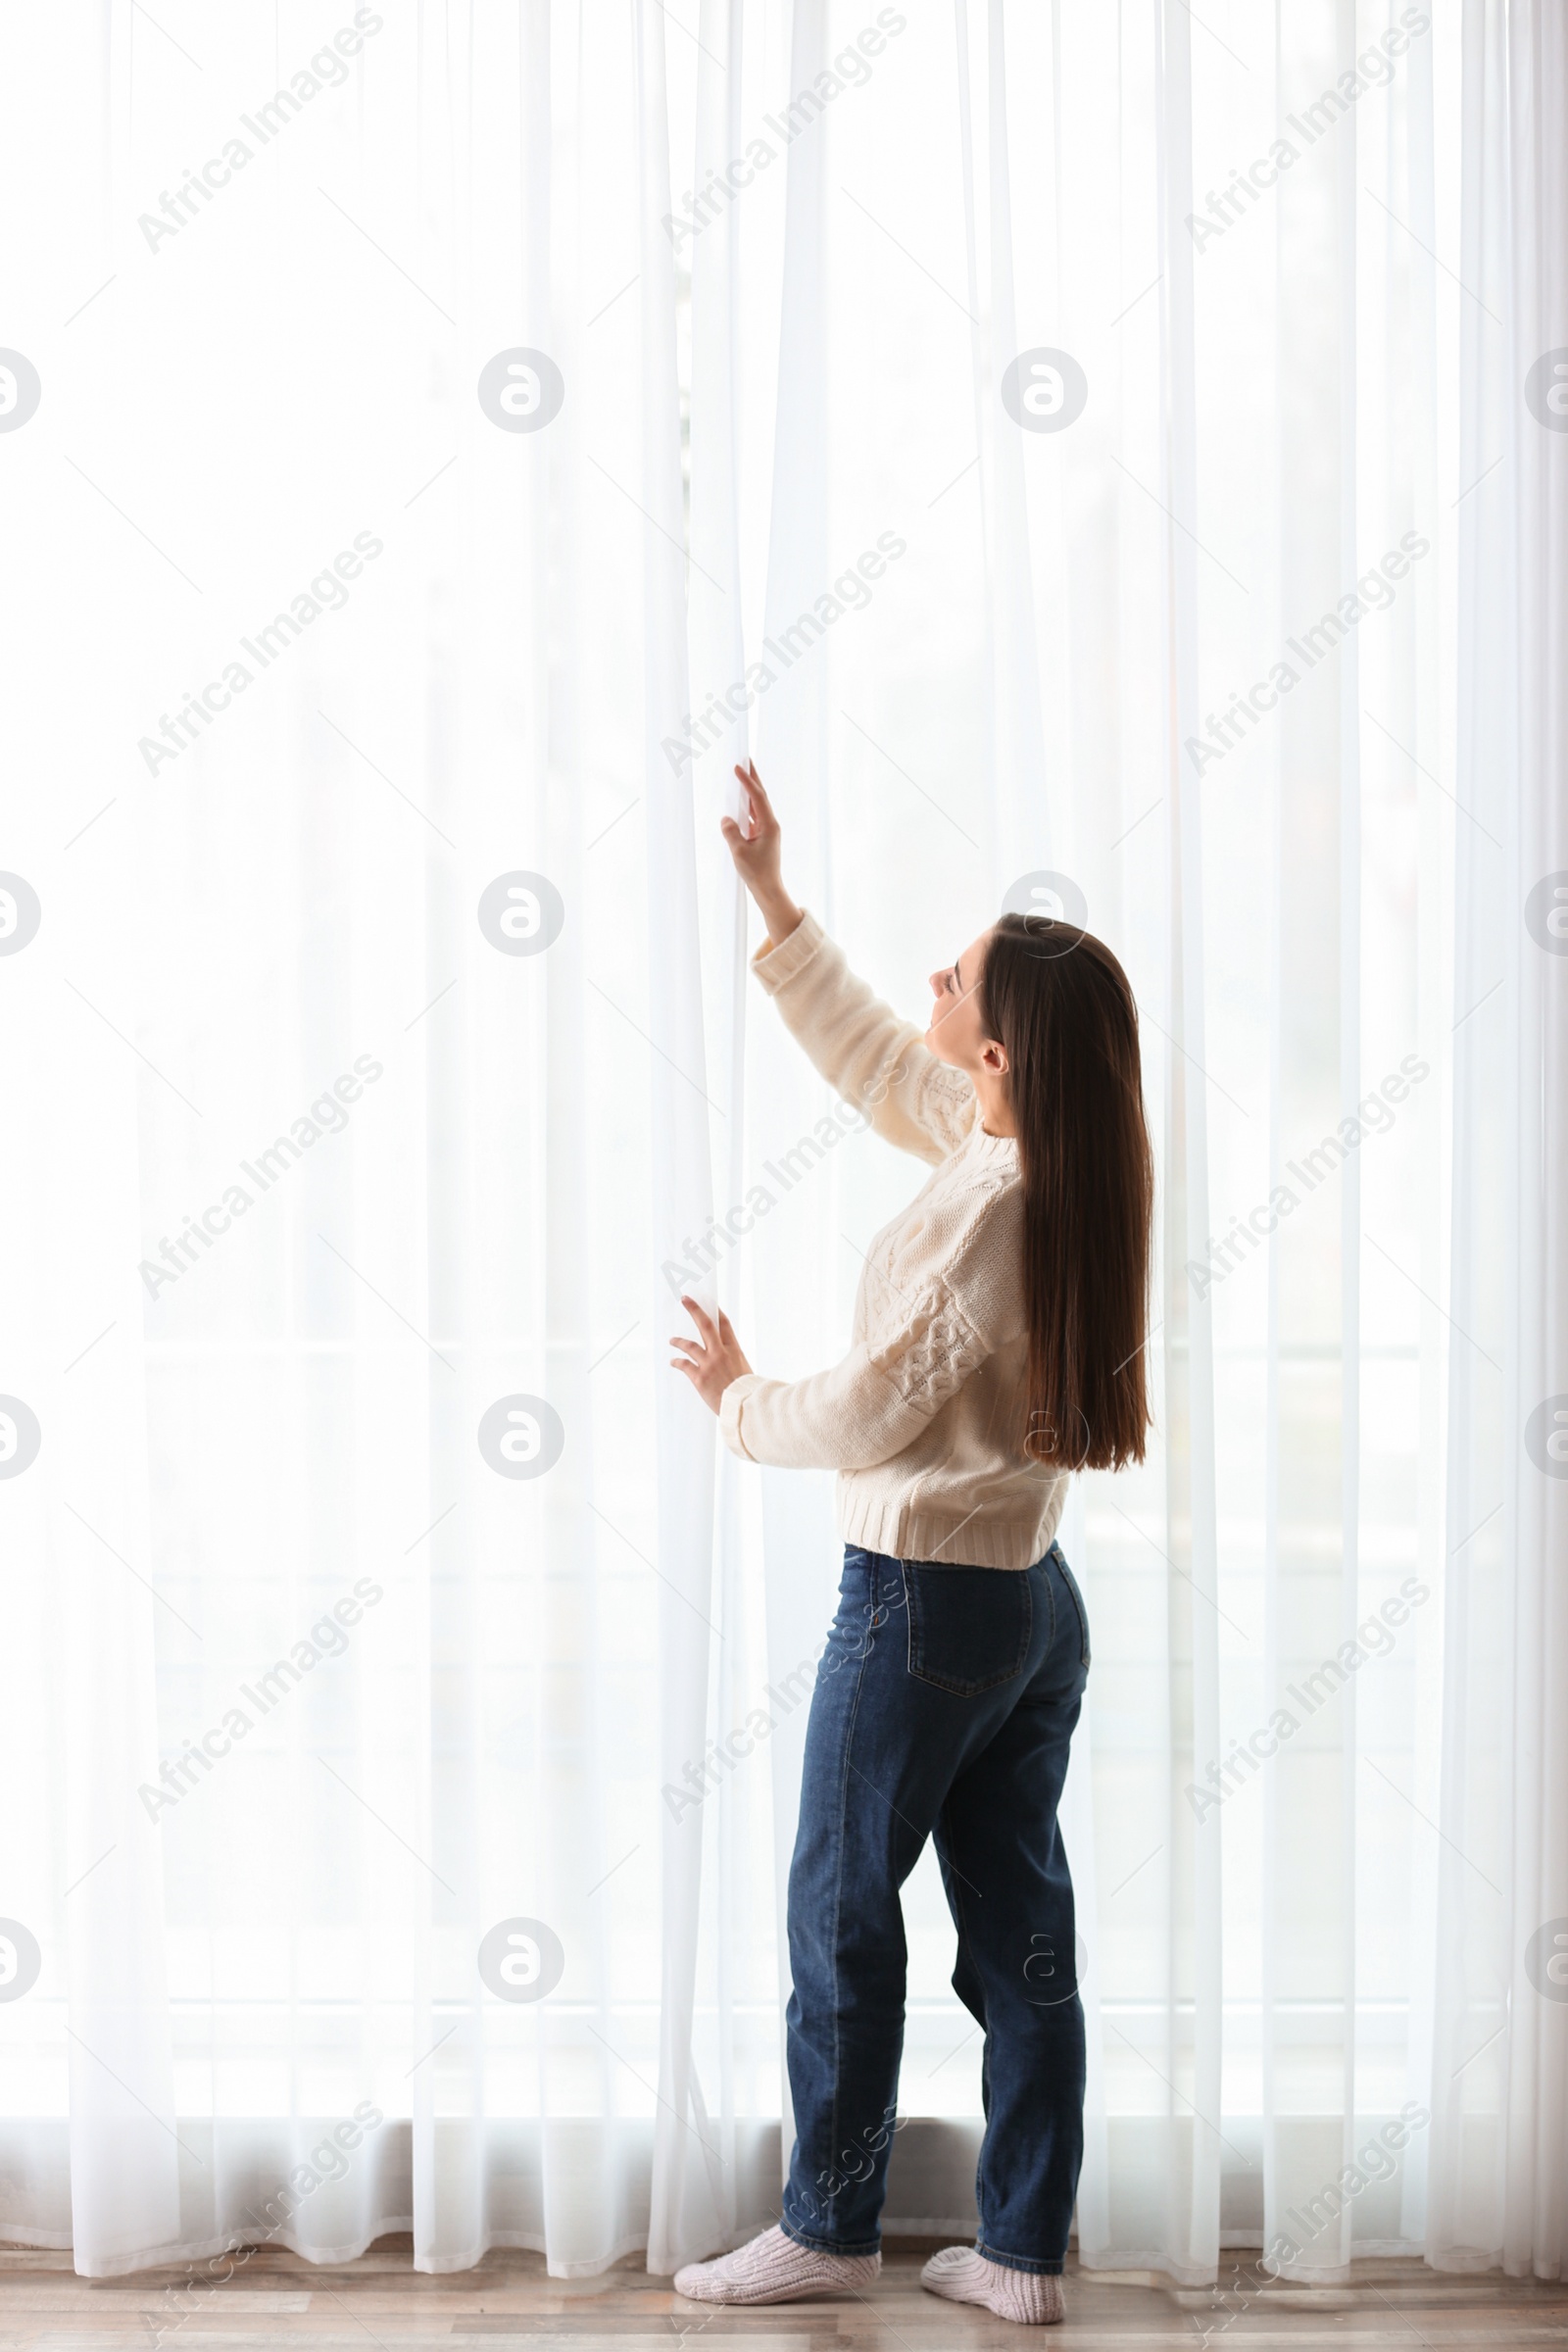 Photo of Young woman opening window curtains at home